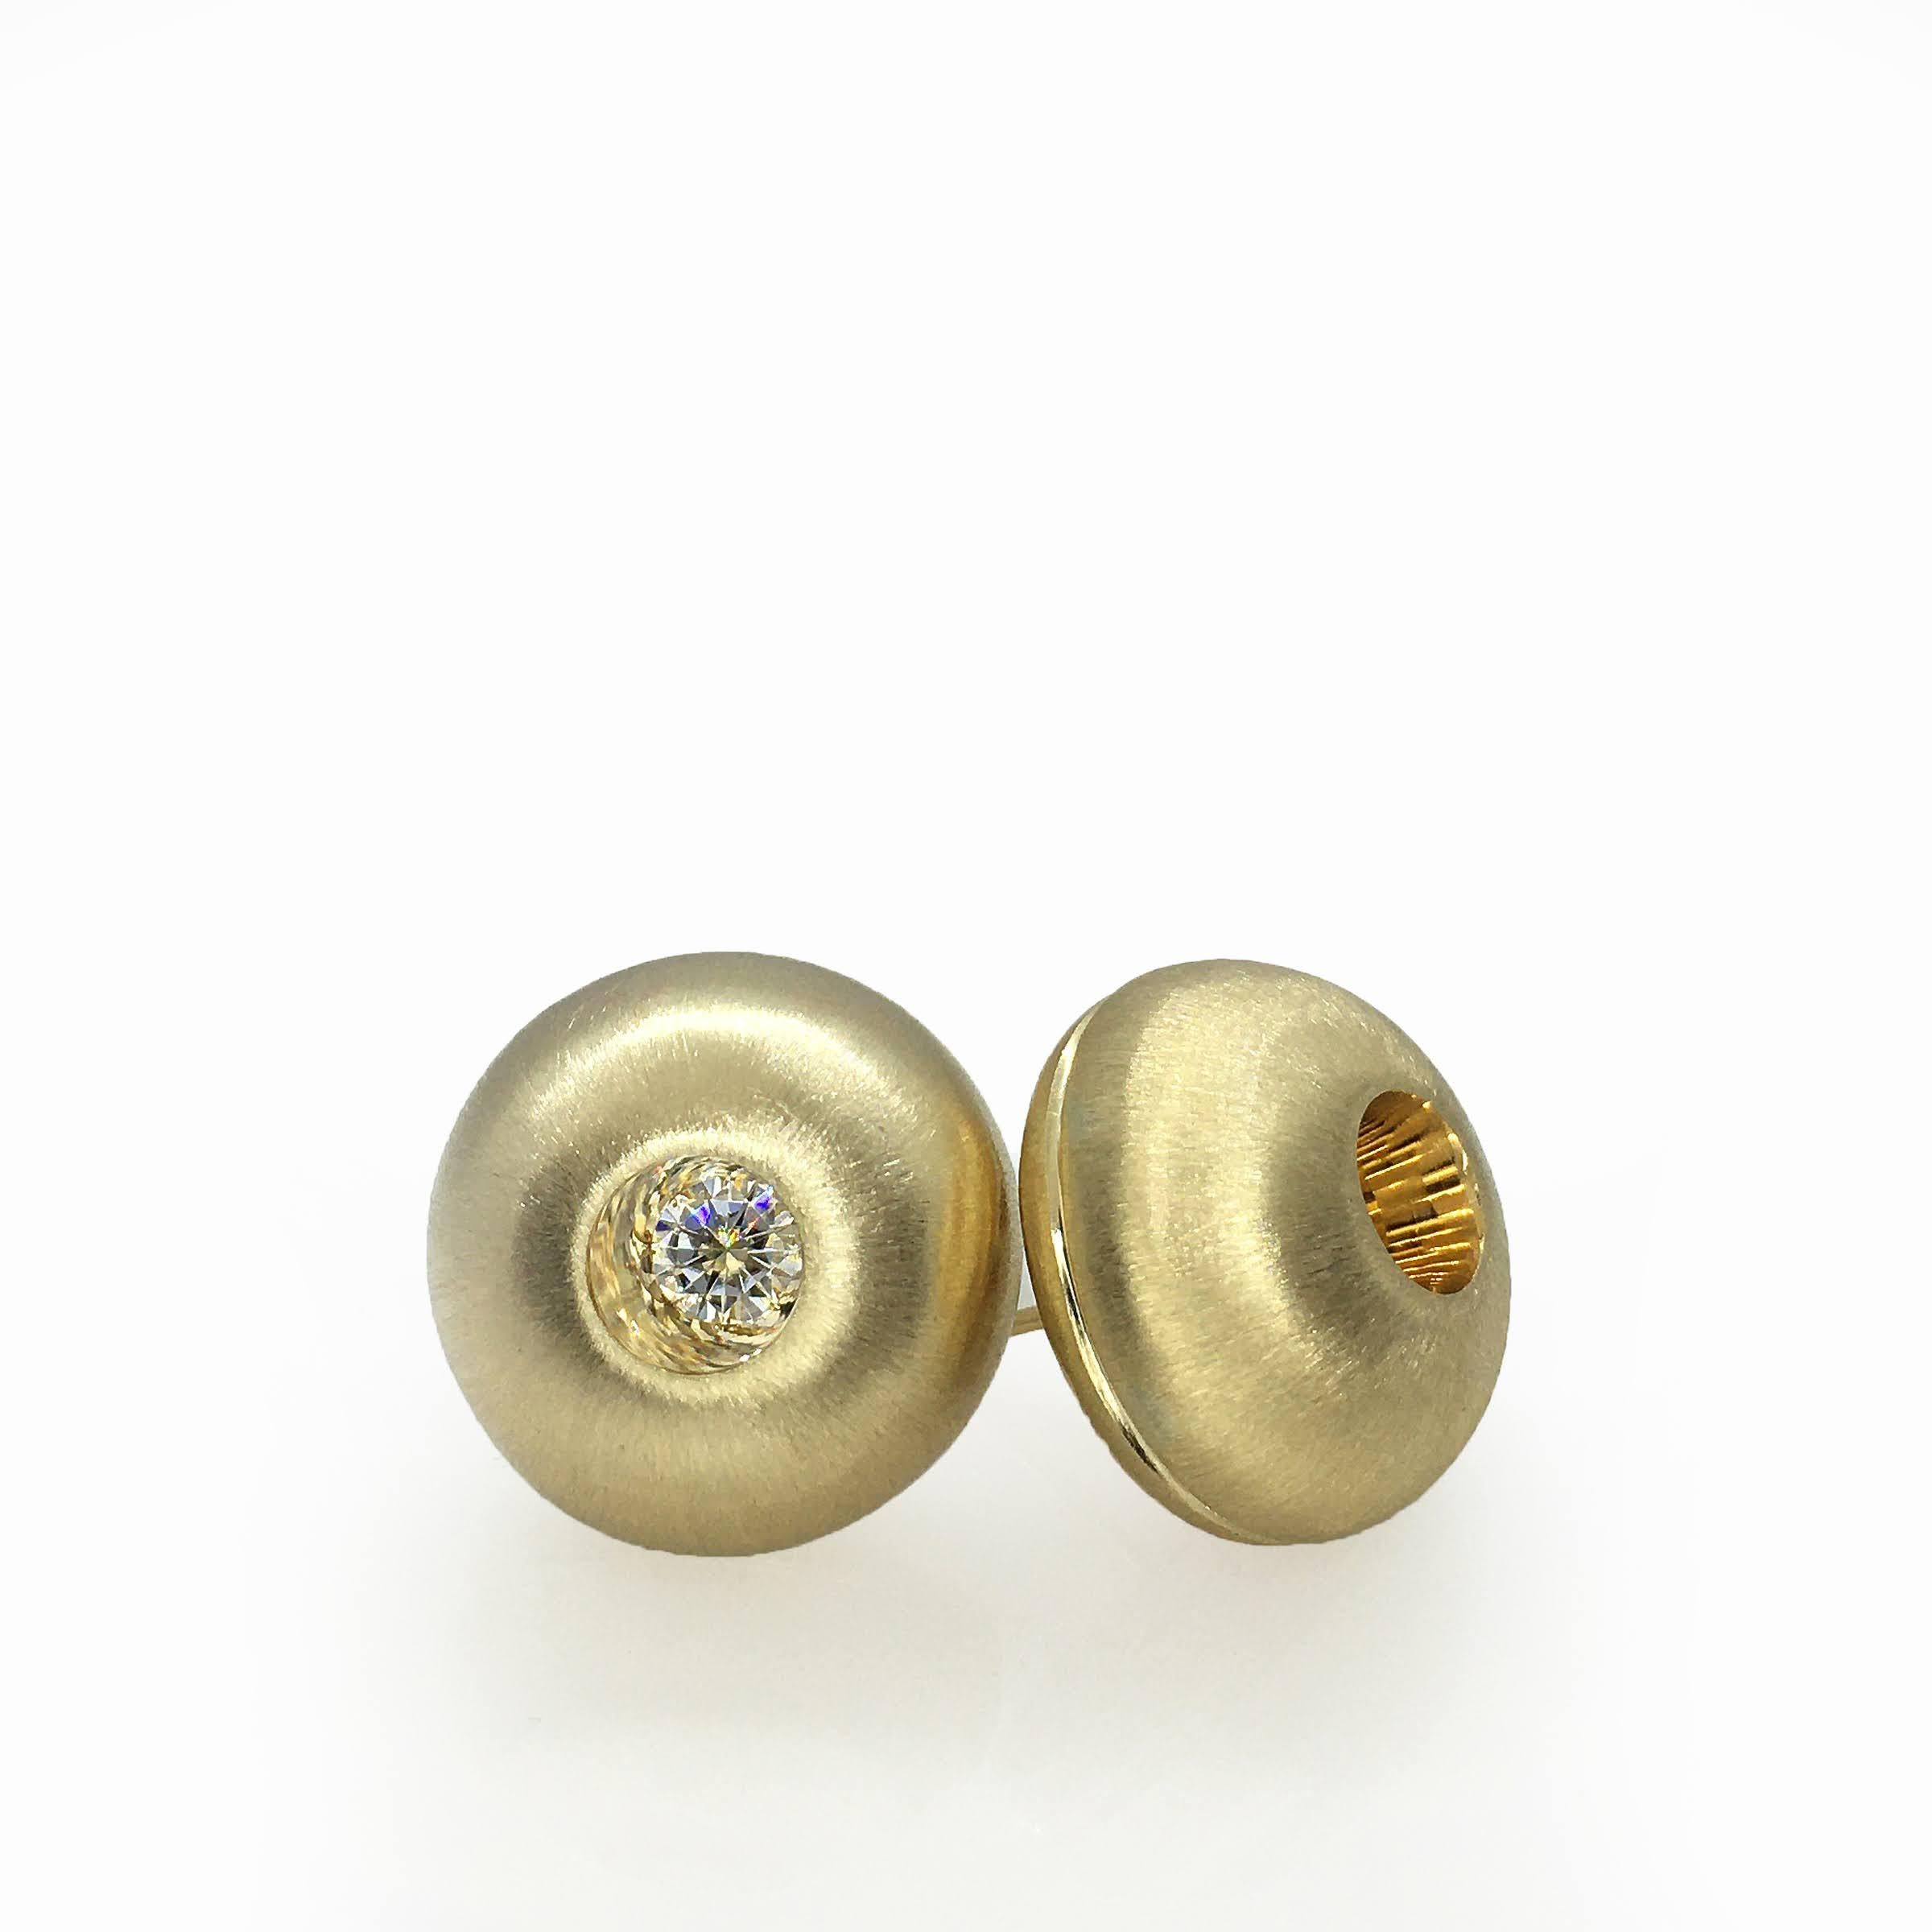 These White Sapphire in Yellow Gold Dome Stud Earrings, part of our Power Series, are a symbolic design inspired by the idea of looking inward, the notion of what a person needs is already inside of them. The clean and classic lines are imaginative,